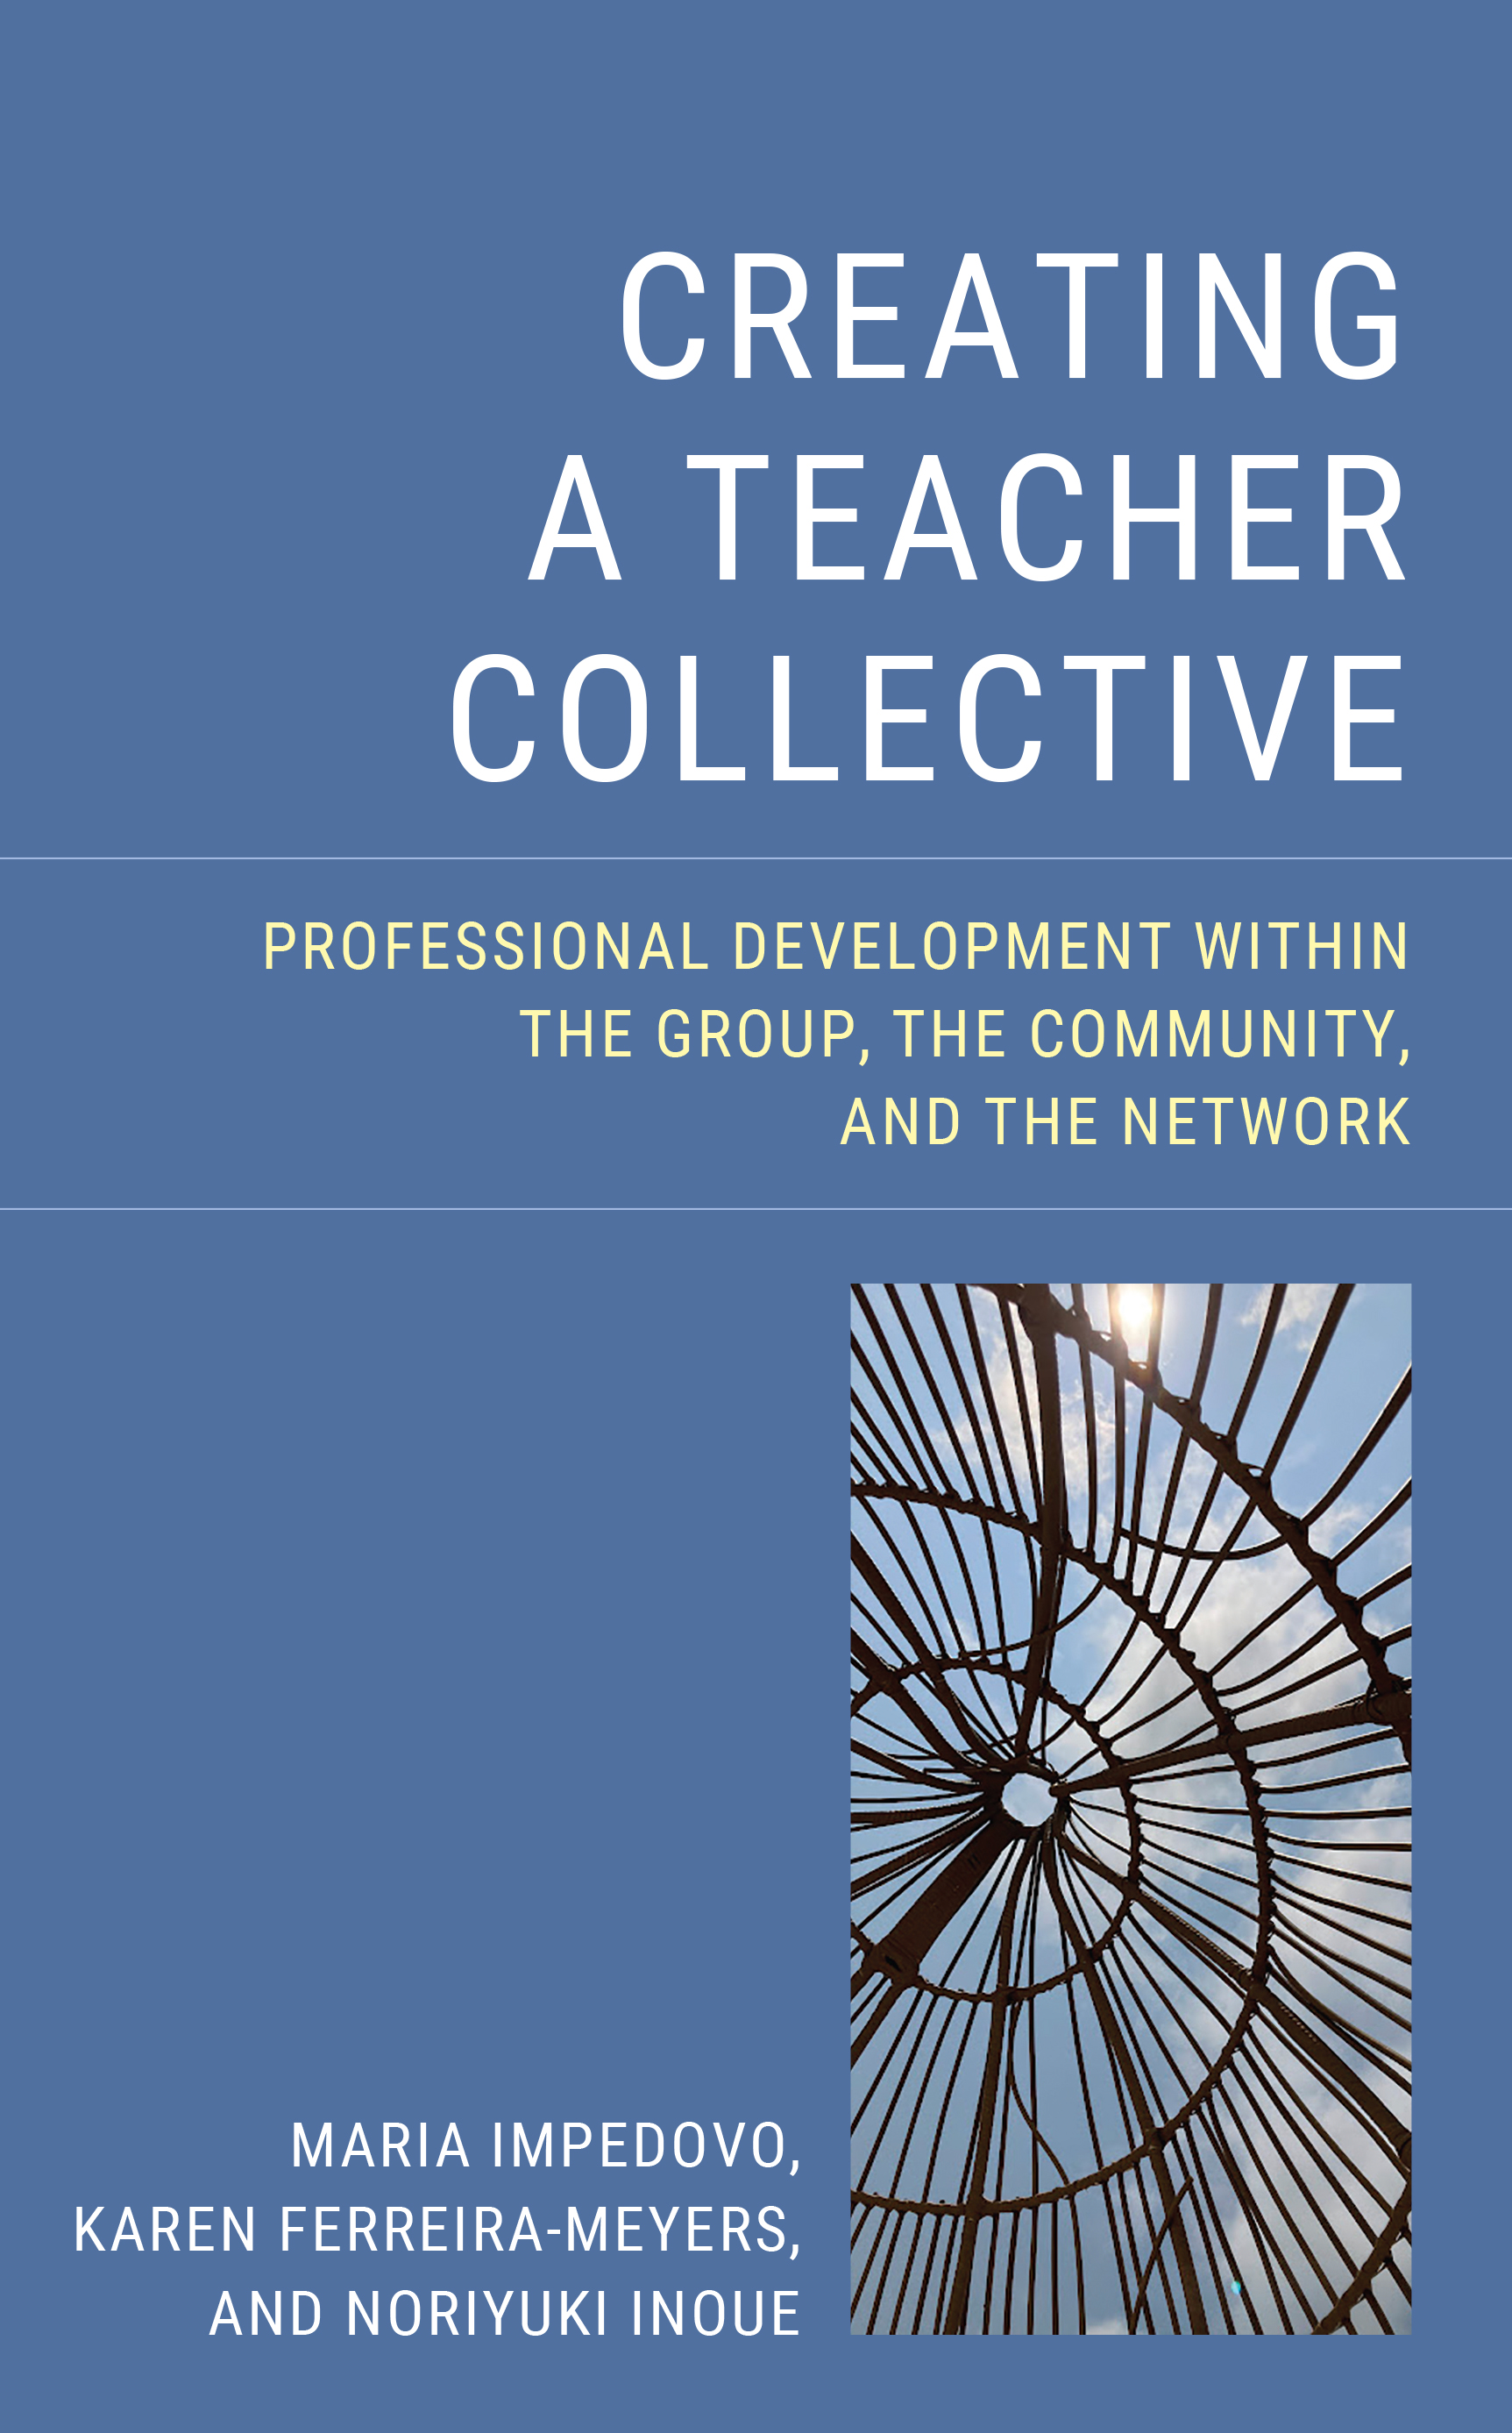 Creating a Teacher Collective: Professional Development Within the Group, the Community, and the Network